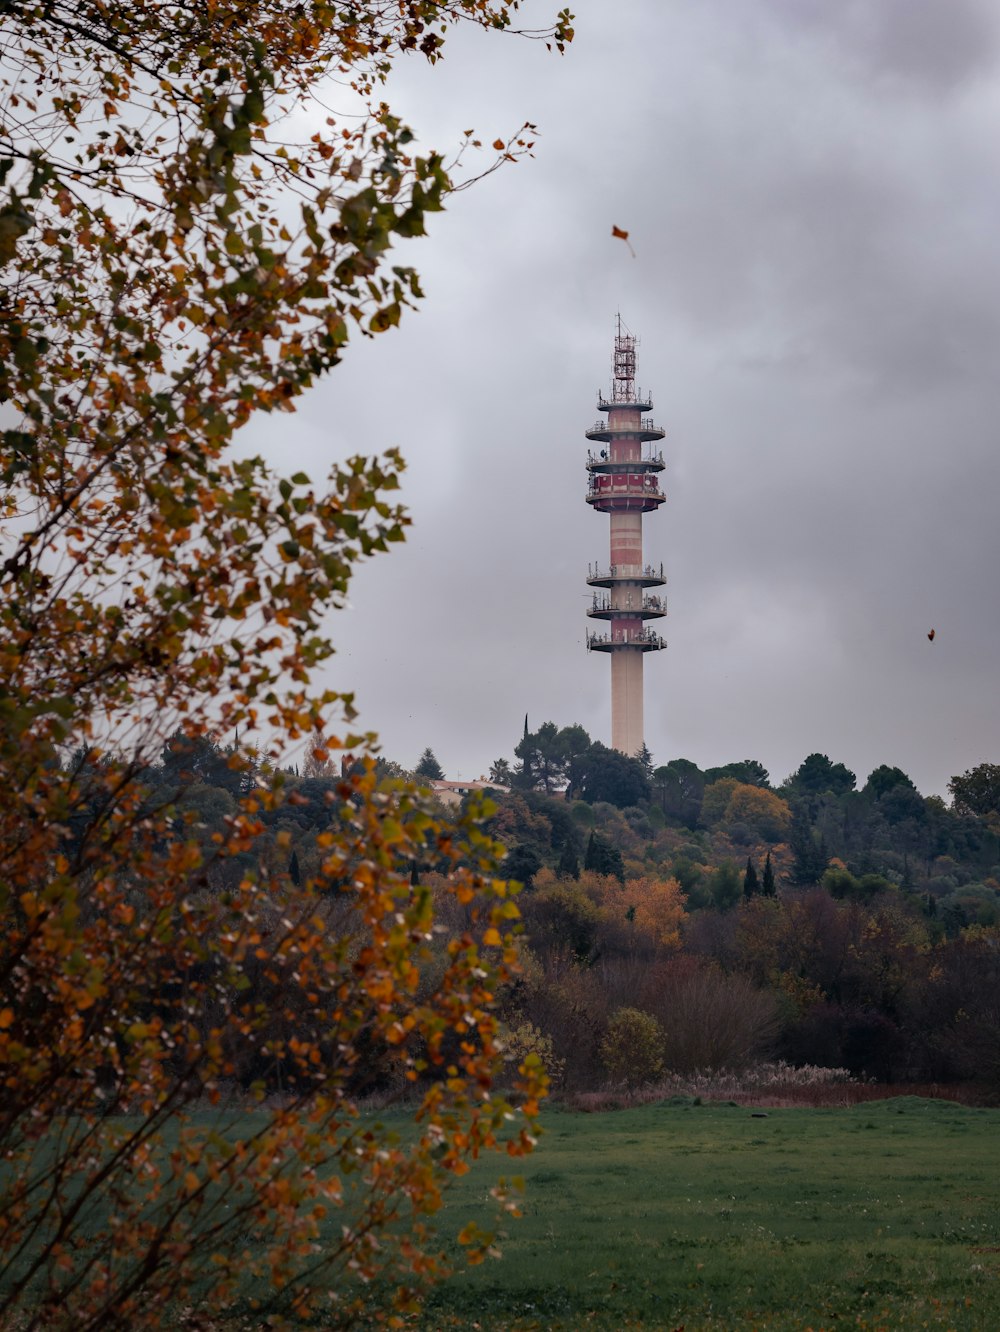 white and black tower surrounded by trees under cloudy sky during daytime